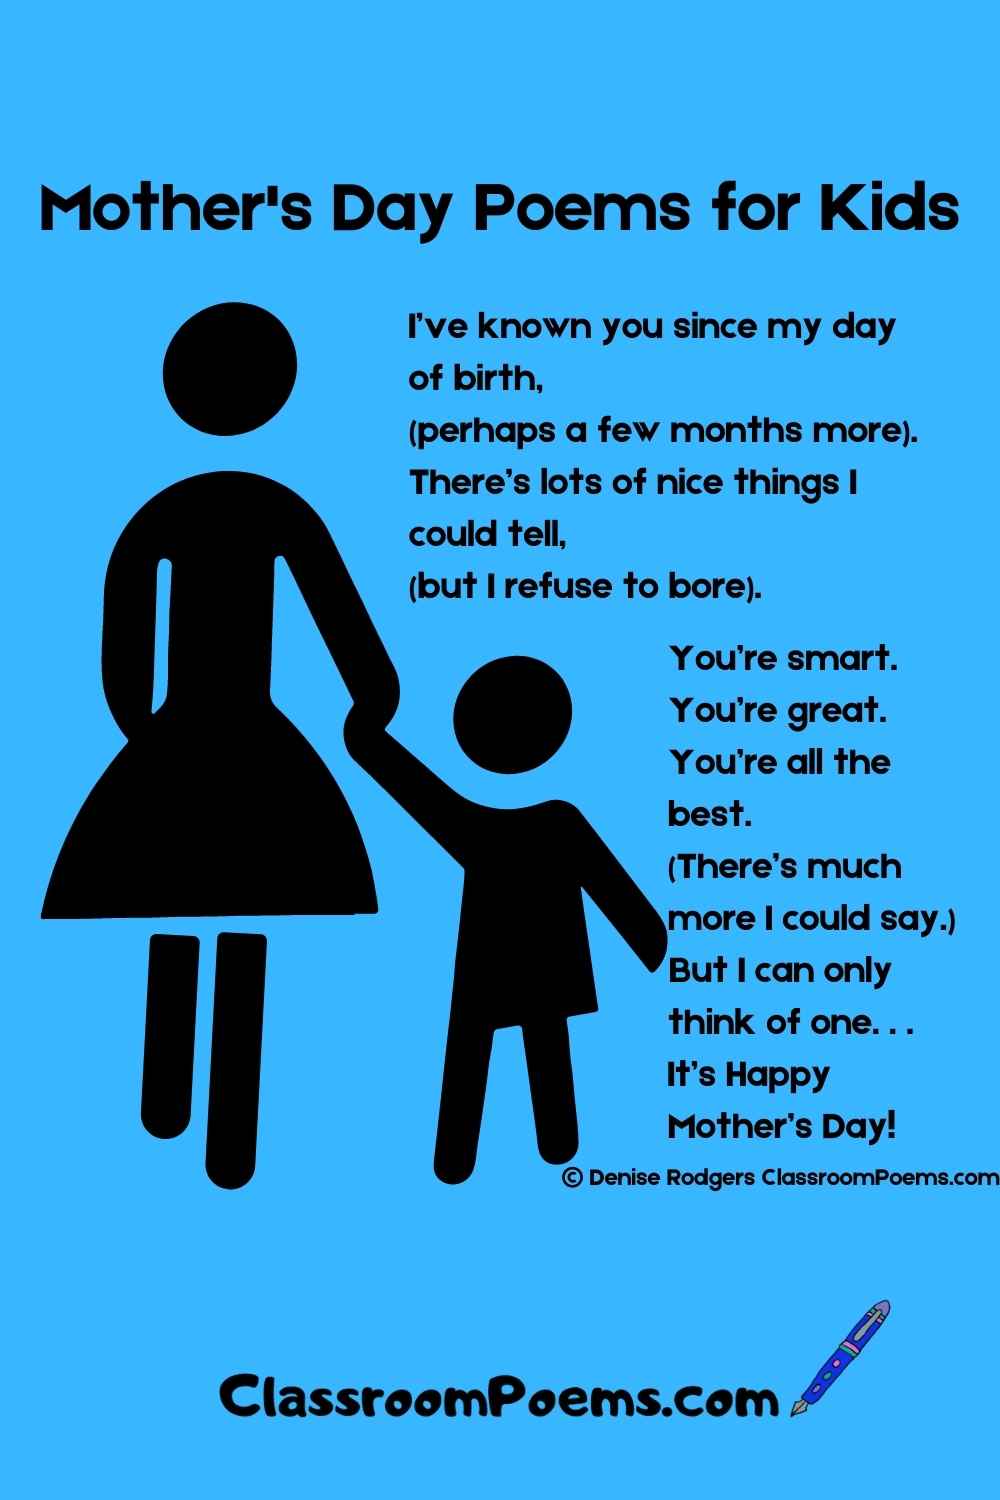 happy valentines day poems for mom